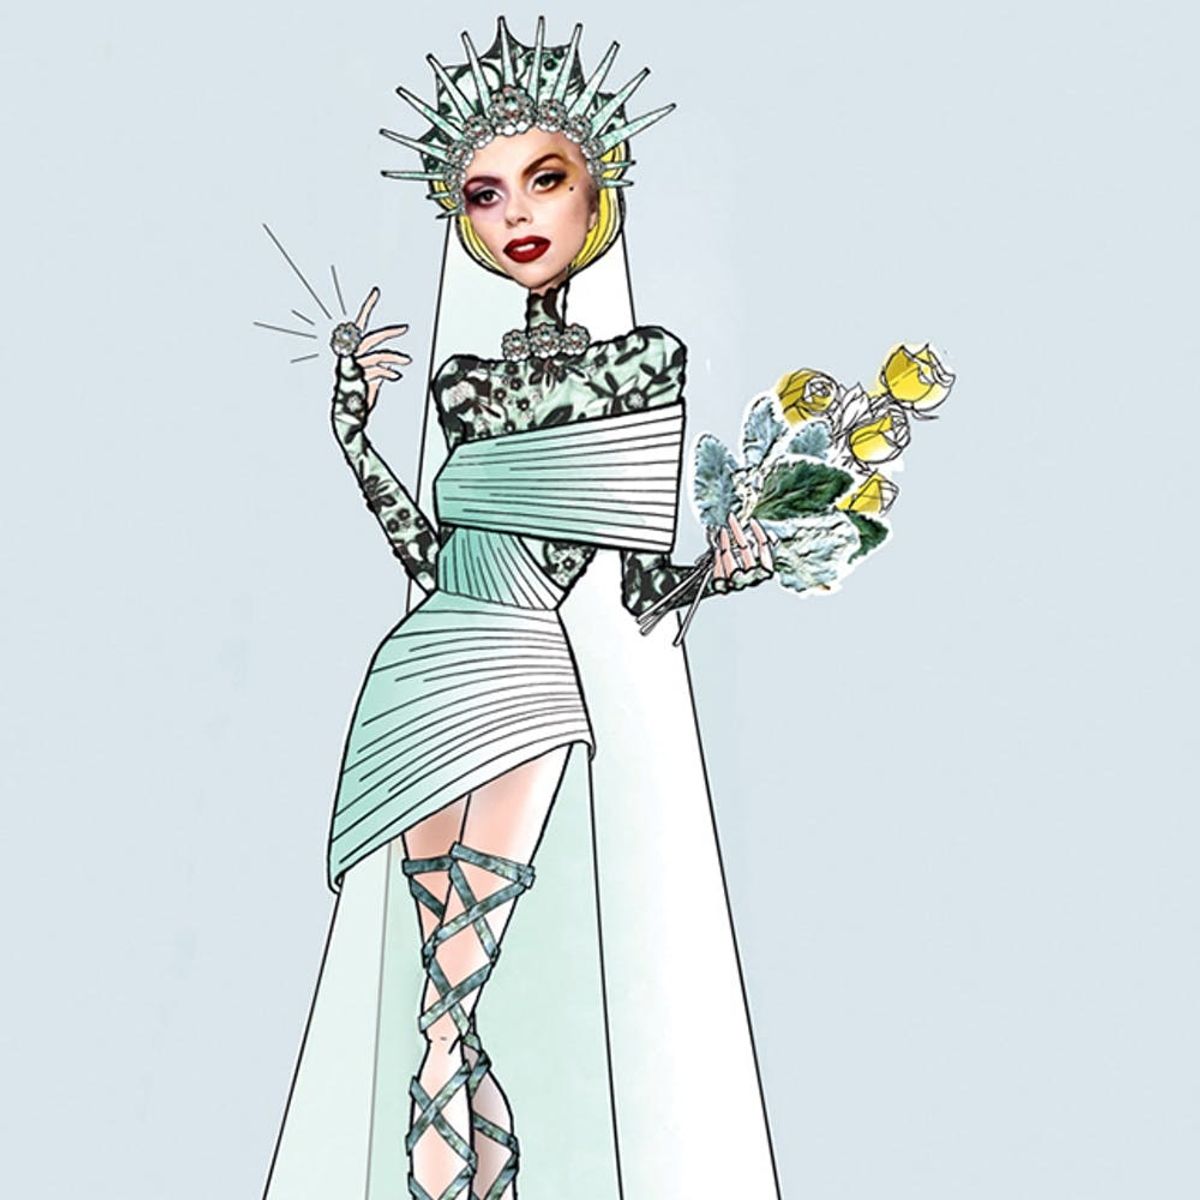 See What Karl Lagerfeld, Monique Lhuillier + More Designed for Lady Gaga’s Wedding Dress